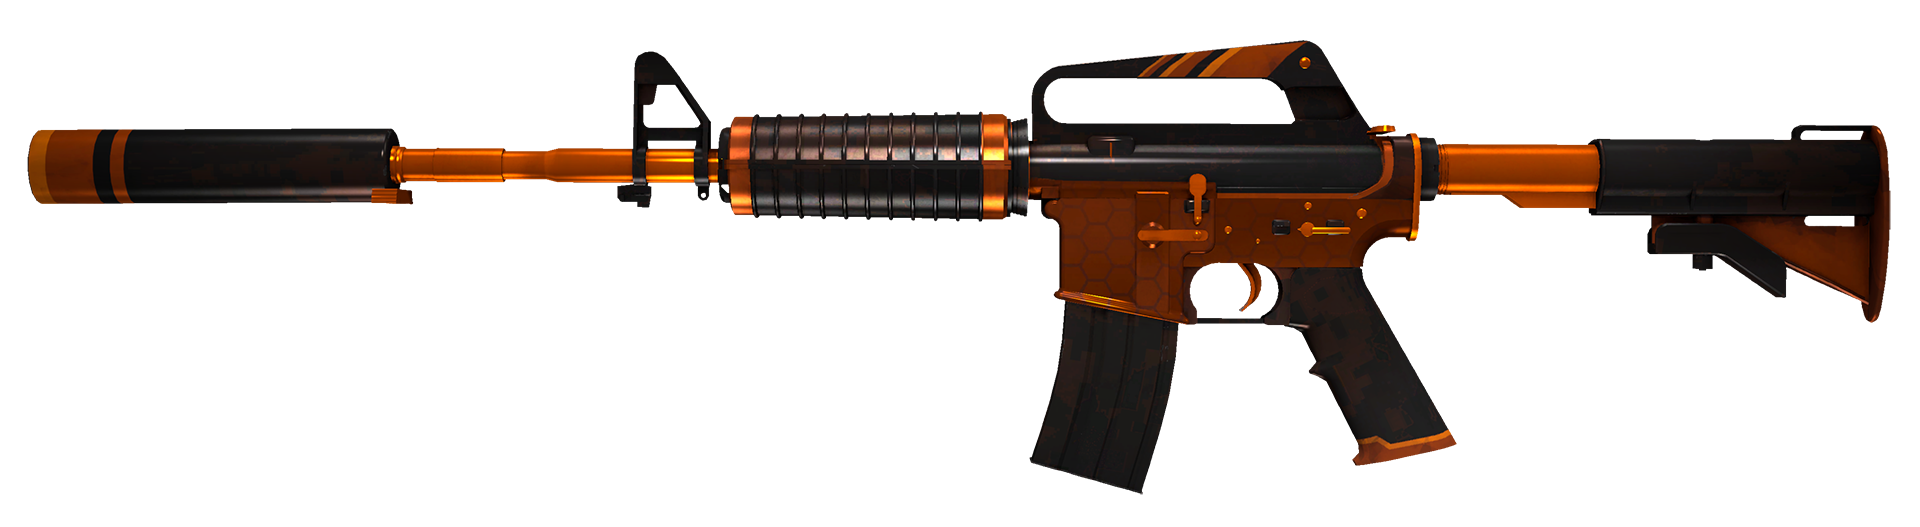 M4A1-S Atomic Alloy Large Rendering